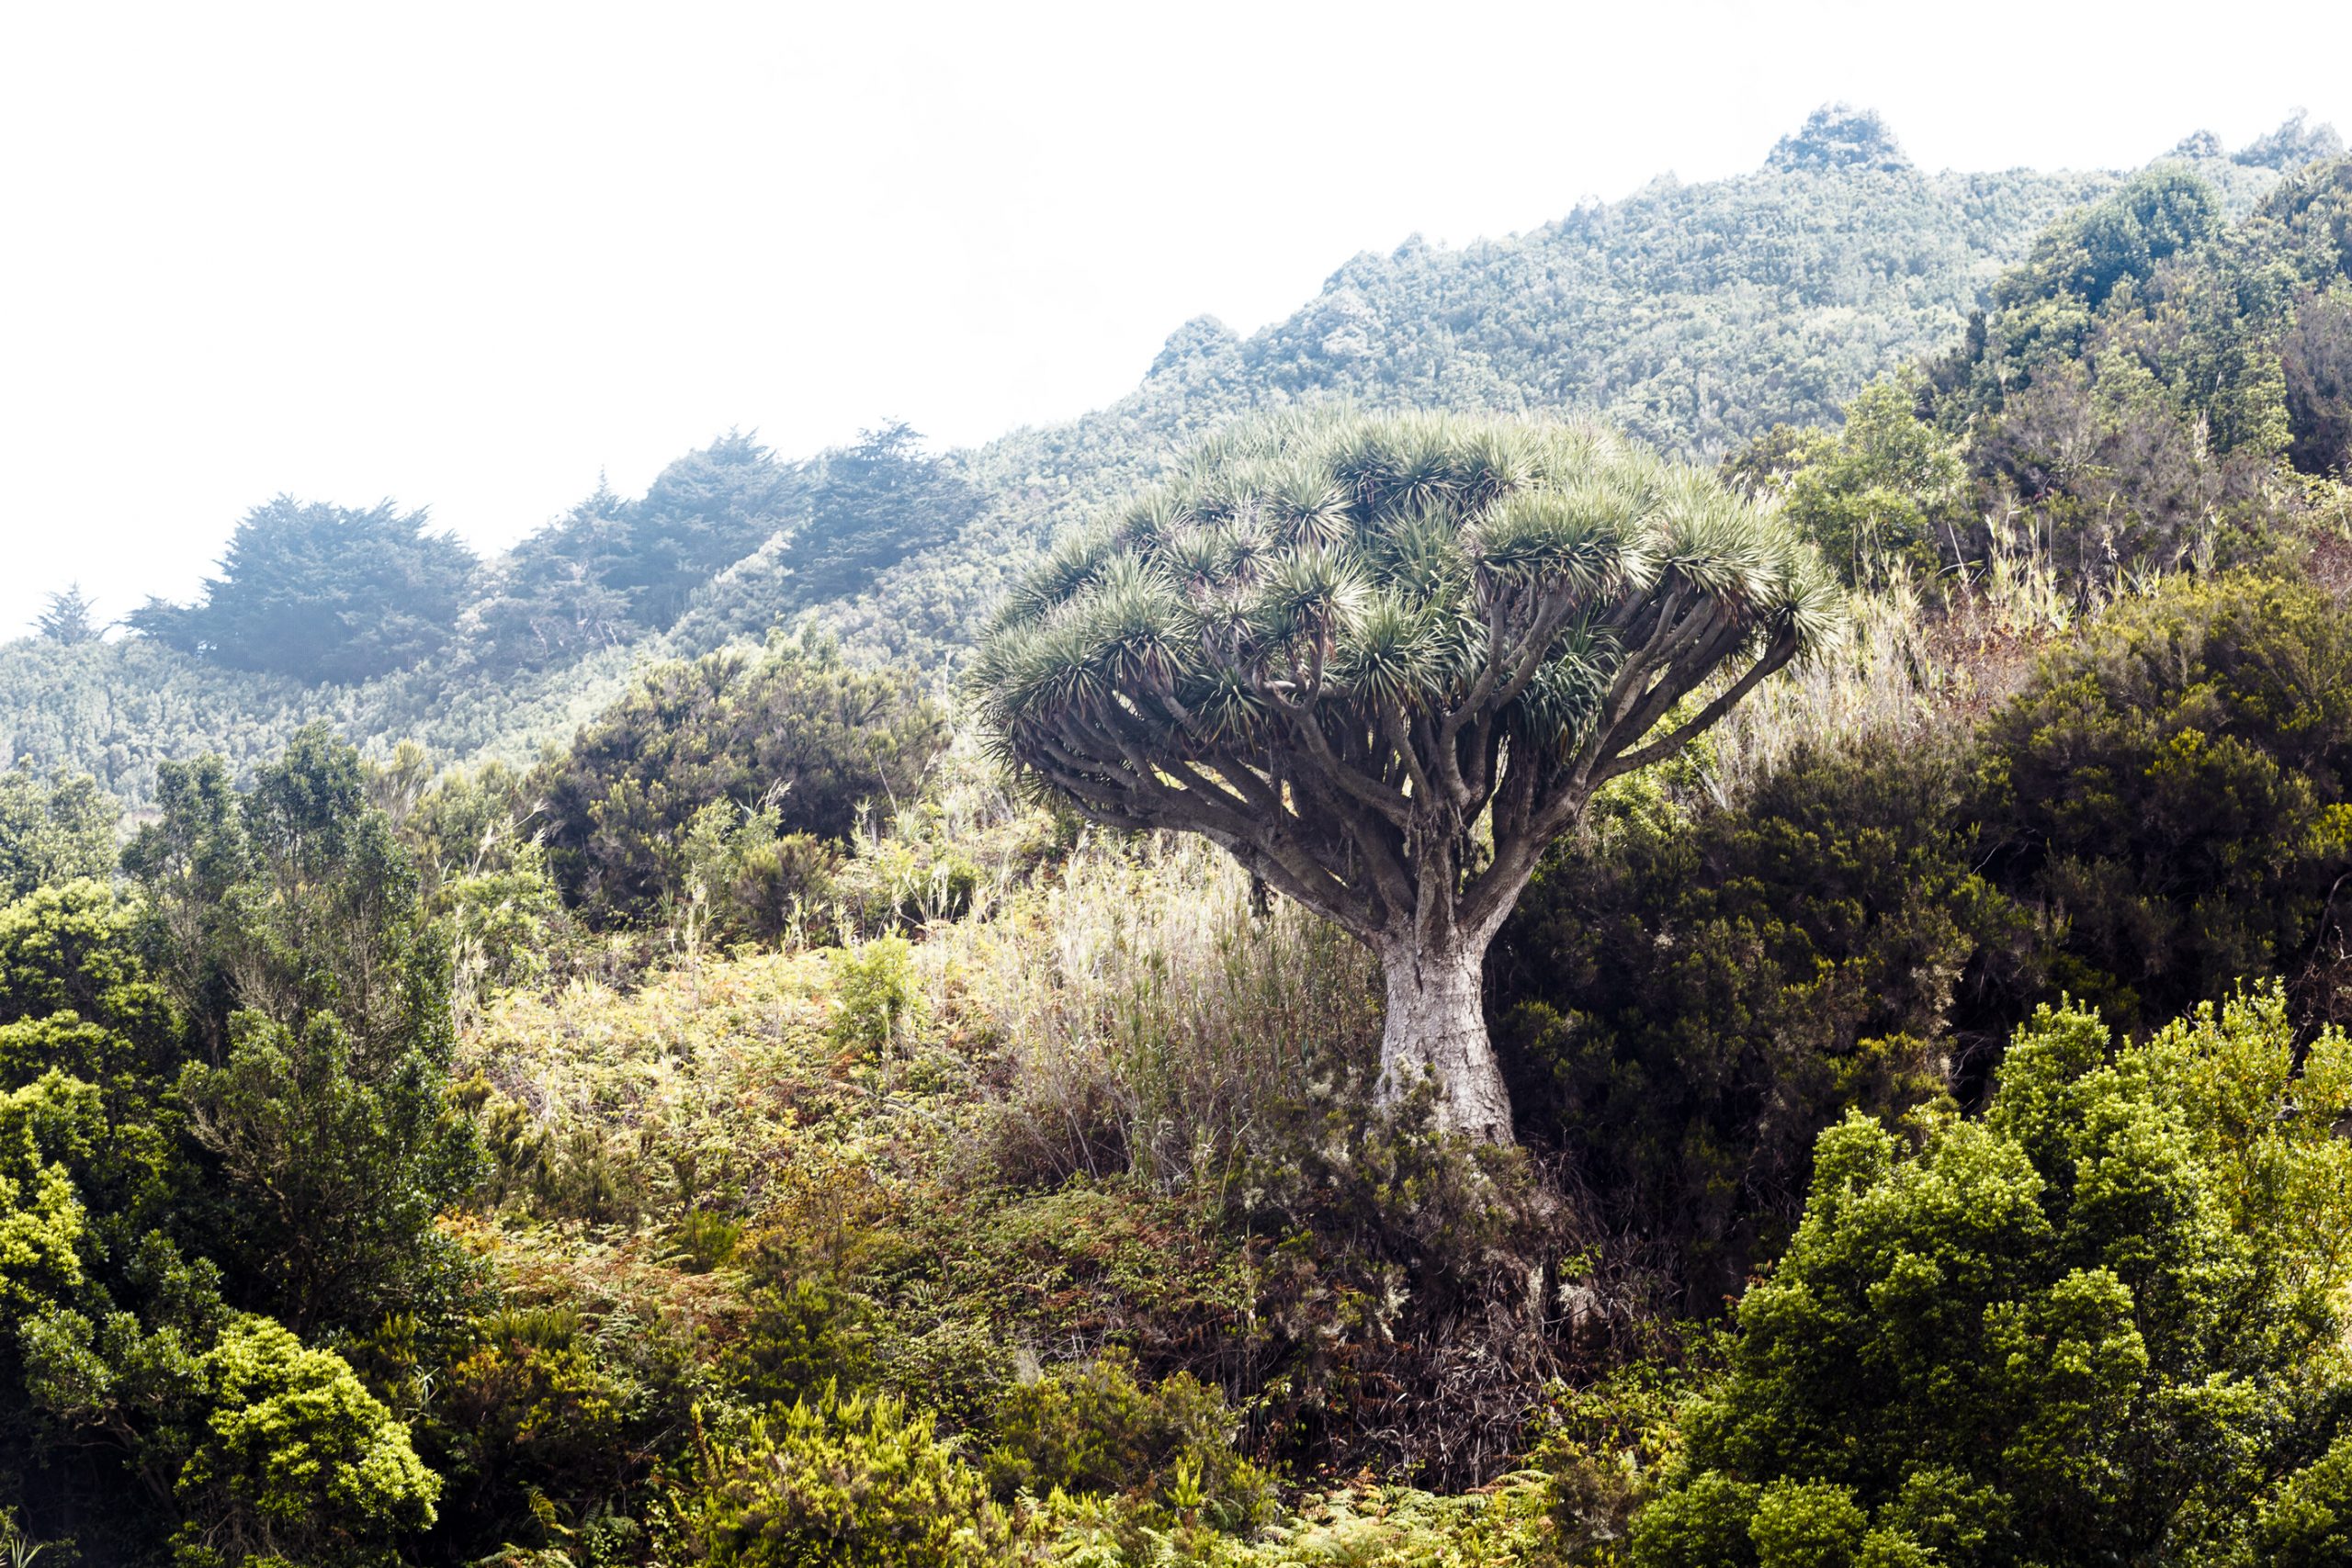 Dragon tree in the forest. La Palma Island. Canaries. Spain